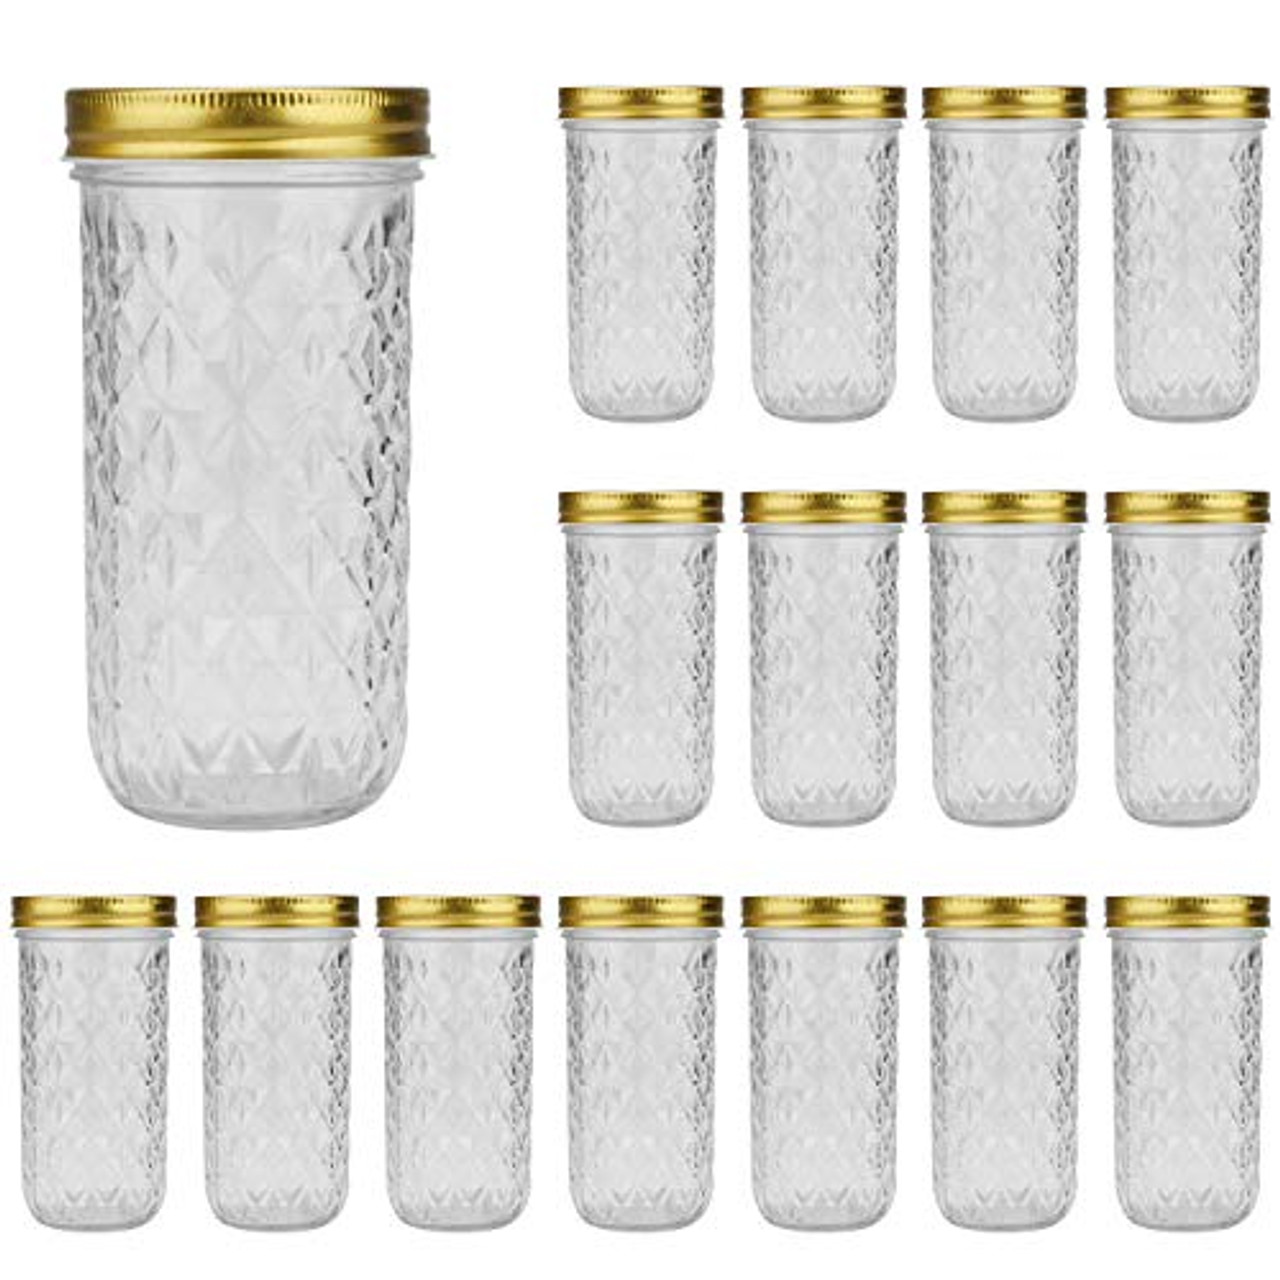 Encheng 8 oz Glass Jars With Lids,Ball Wide Mouth Mason Jars For Storage,Canning Jars For Caviar,Herb,Jelly,Jams,Honey,Dishware Safe,Set Of 24